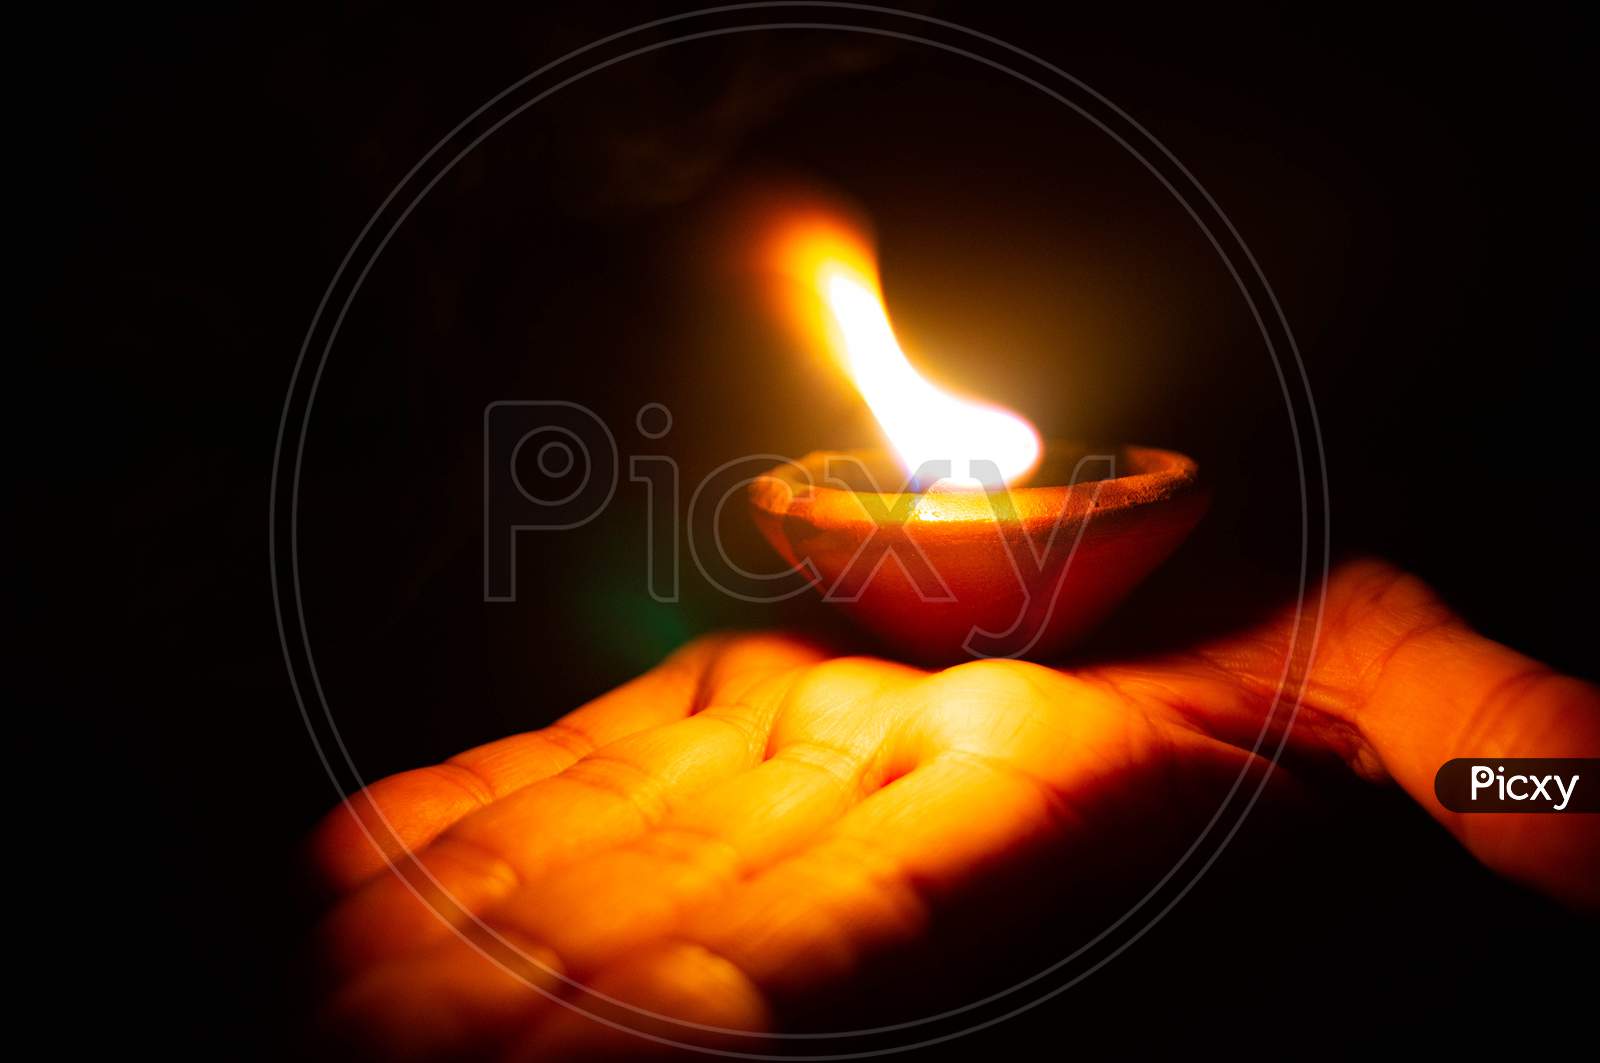 Lit Diya Or Clay Lamp On The Palm Of A Person